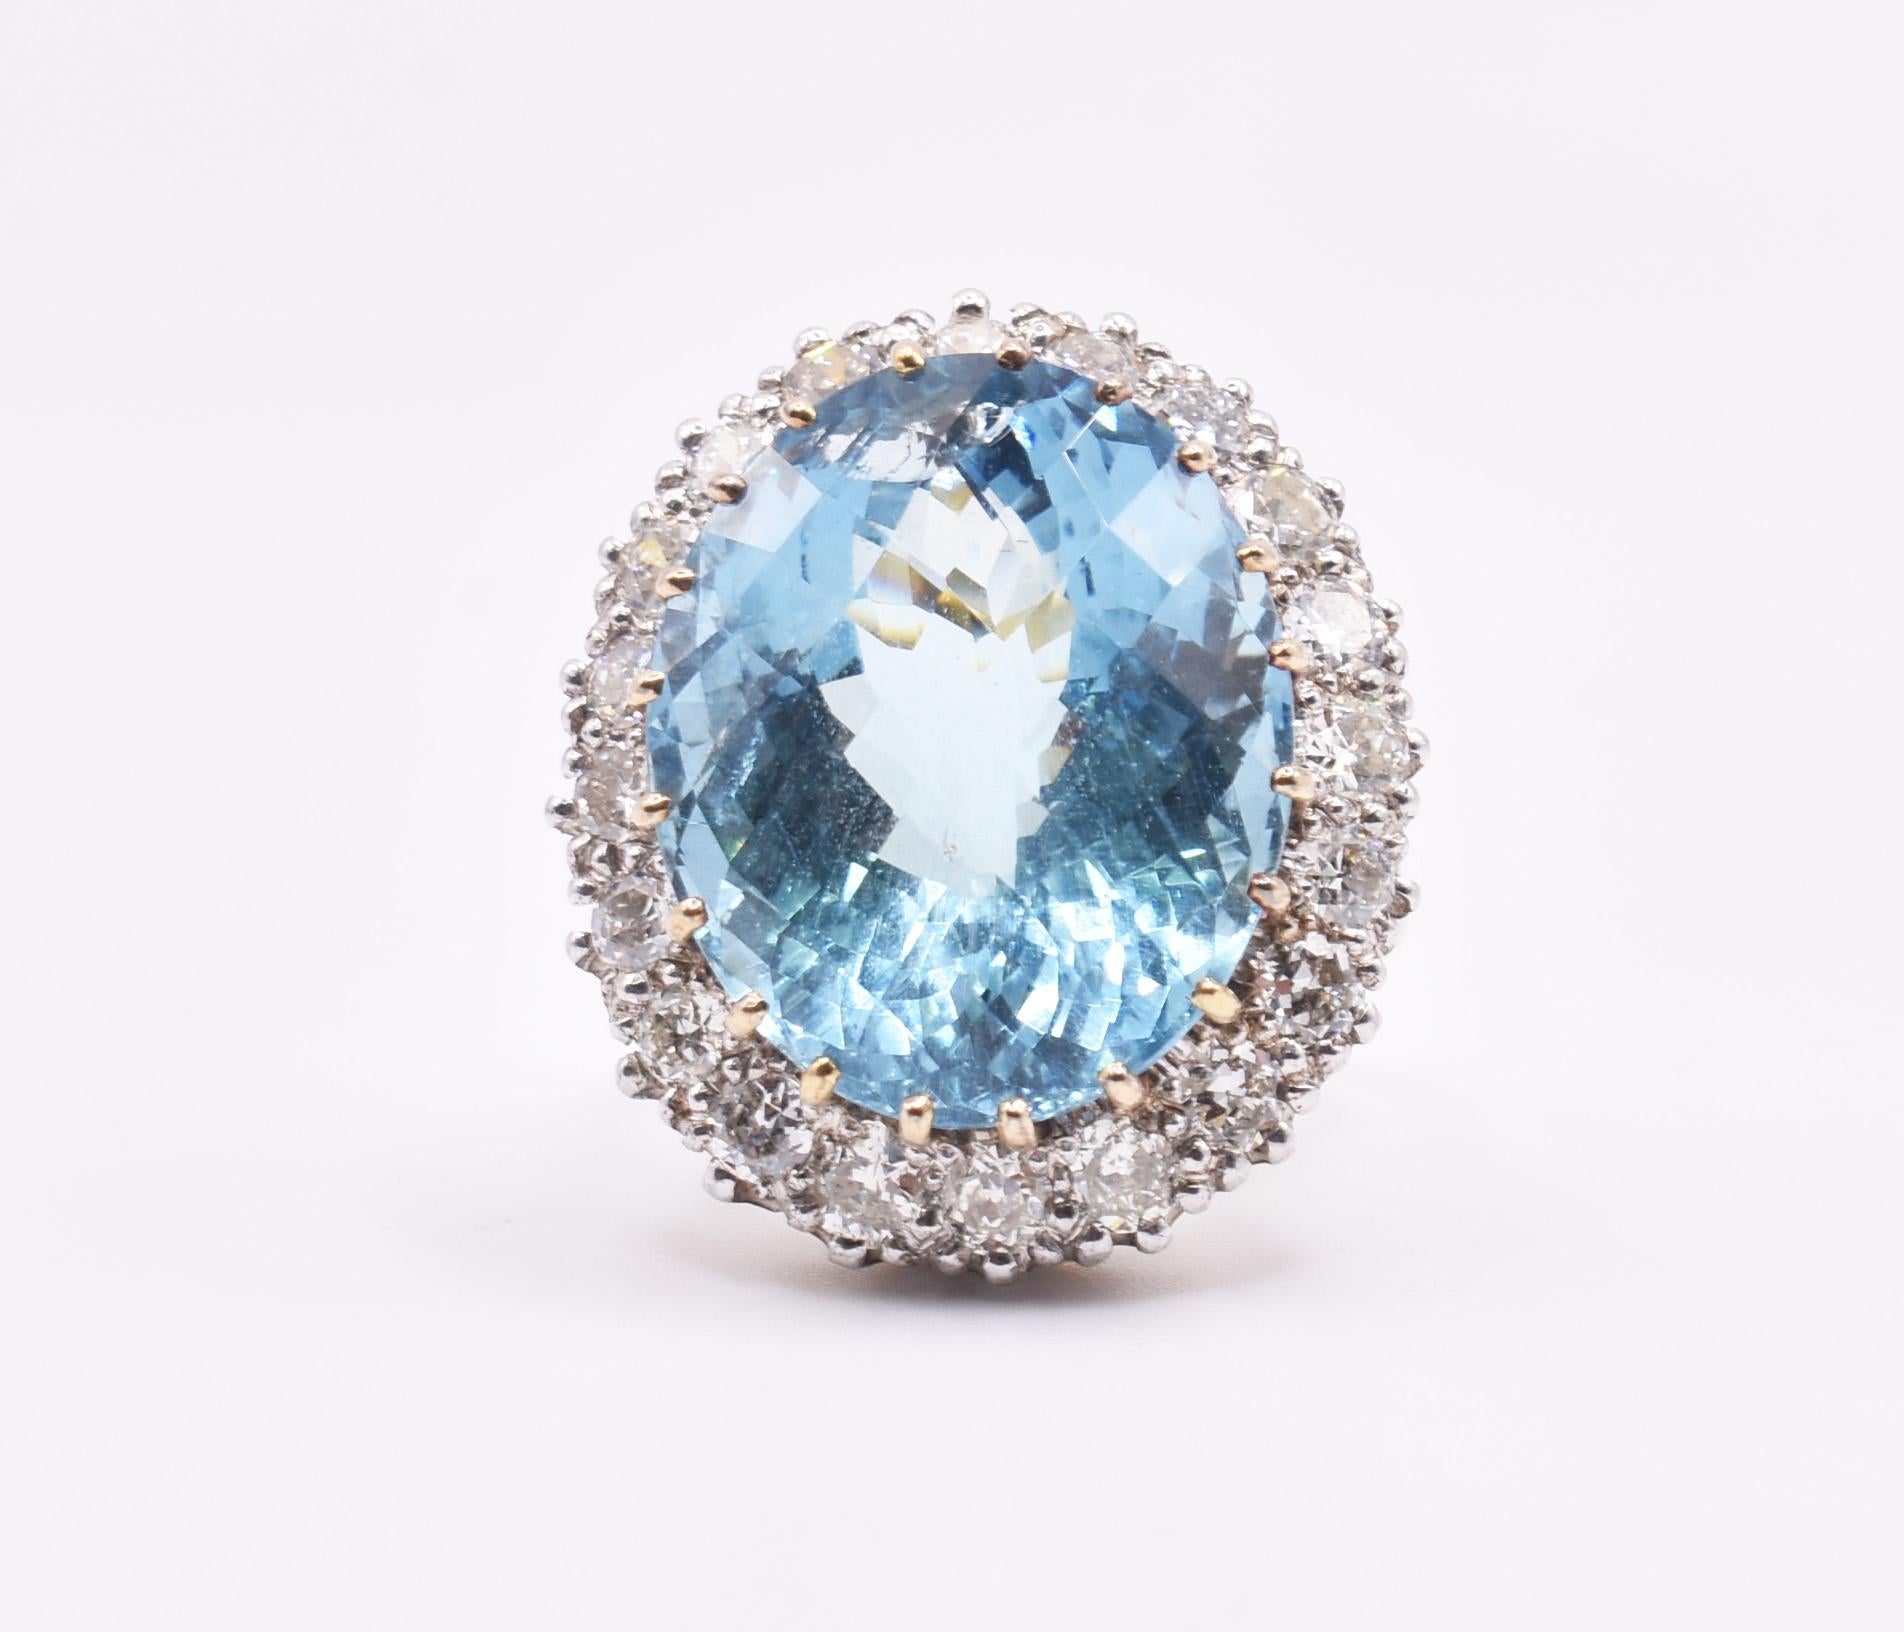 A fine quality antique 18k yellow and white gold aquamarine cocktail ring, boasting a stunning pineapple cut 16ct aquamarine to the centre, of superb colour, in a pronged setting, surrounded by 20 old cut diamonds, totalling approximately 2.40ct.